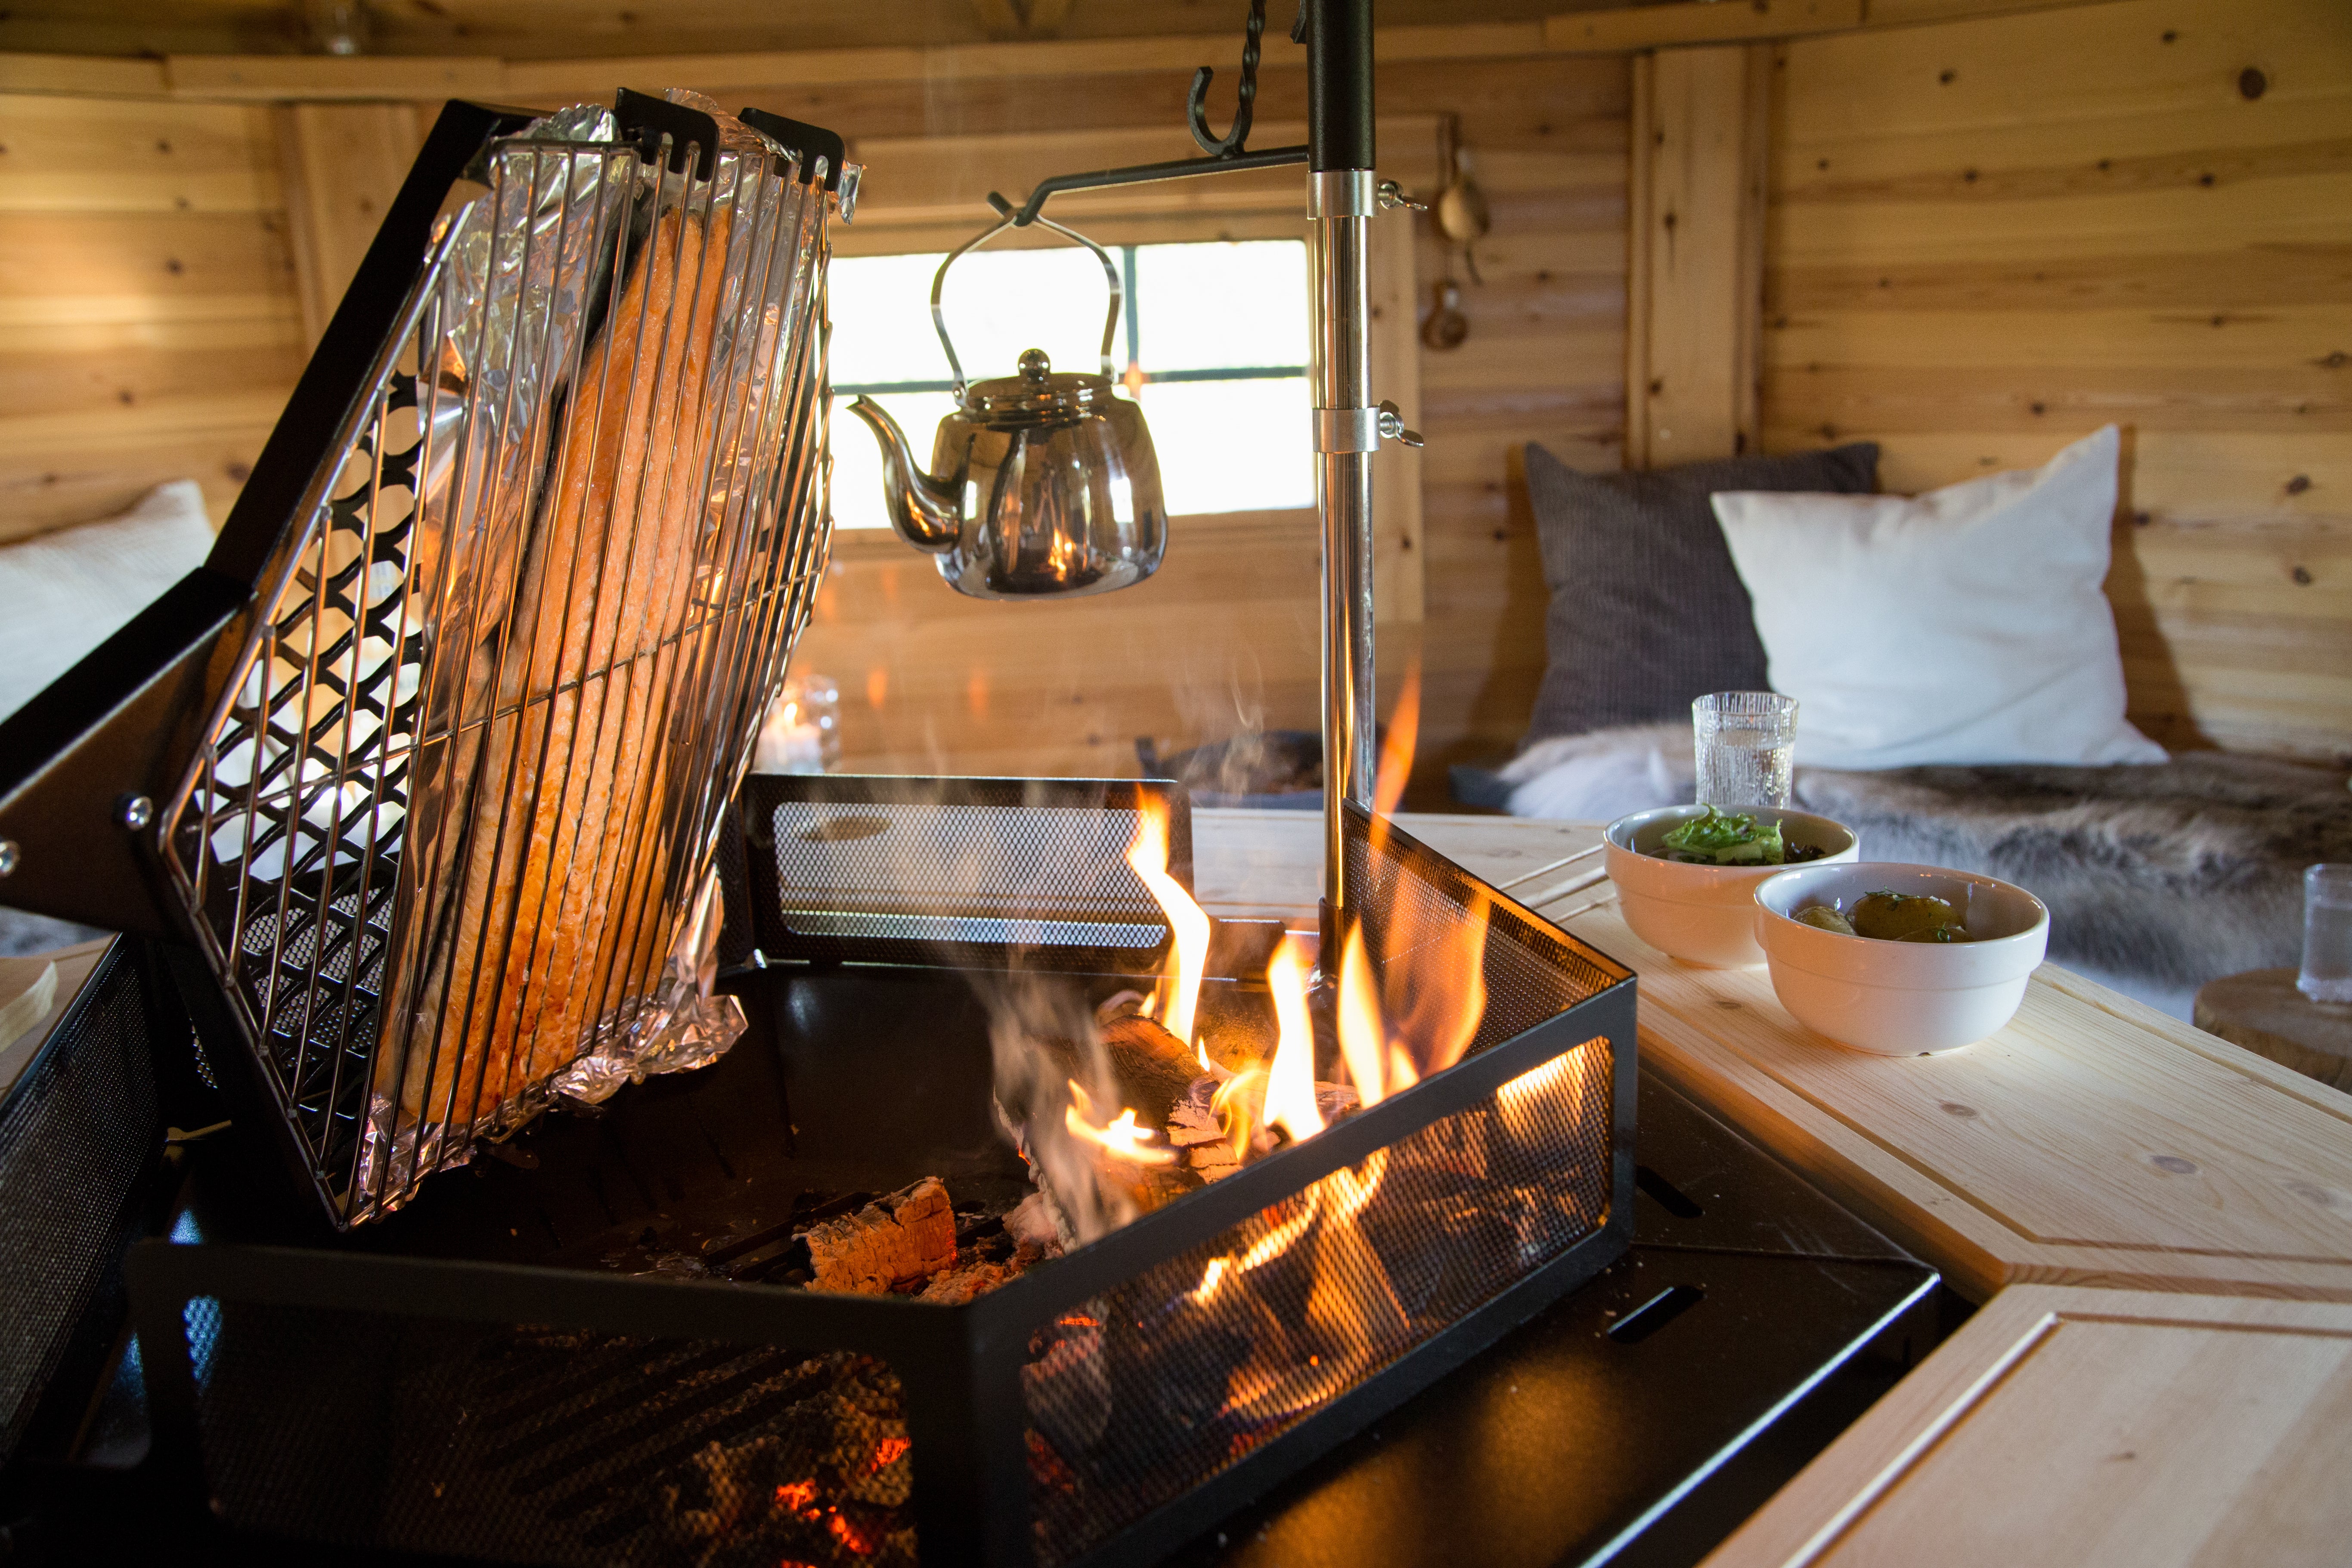    A close-up of a salmon cooking on the Rotating Grill Accessory, inside a hut. Garnishing for the food sits on the table, and pillows rest on the benches.    